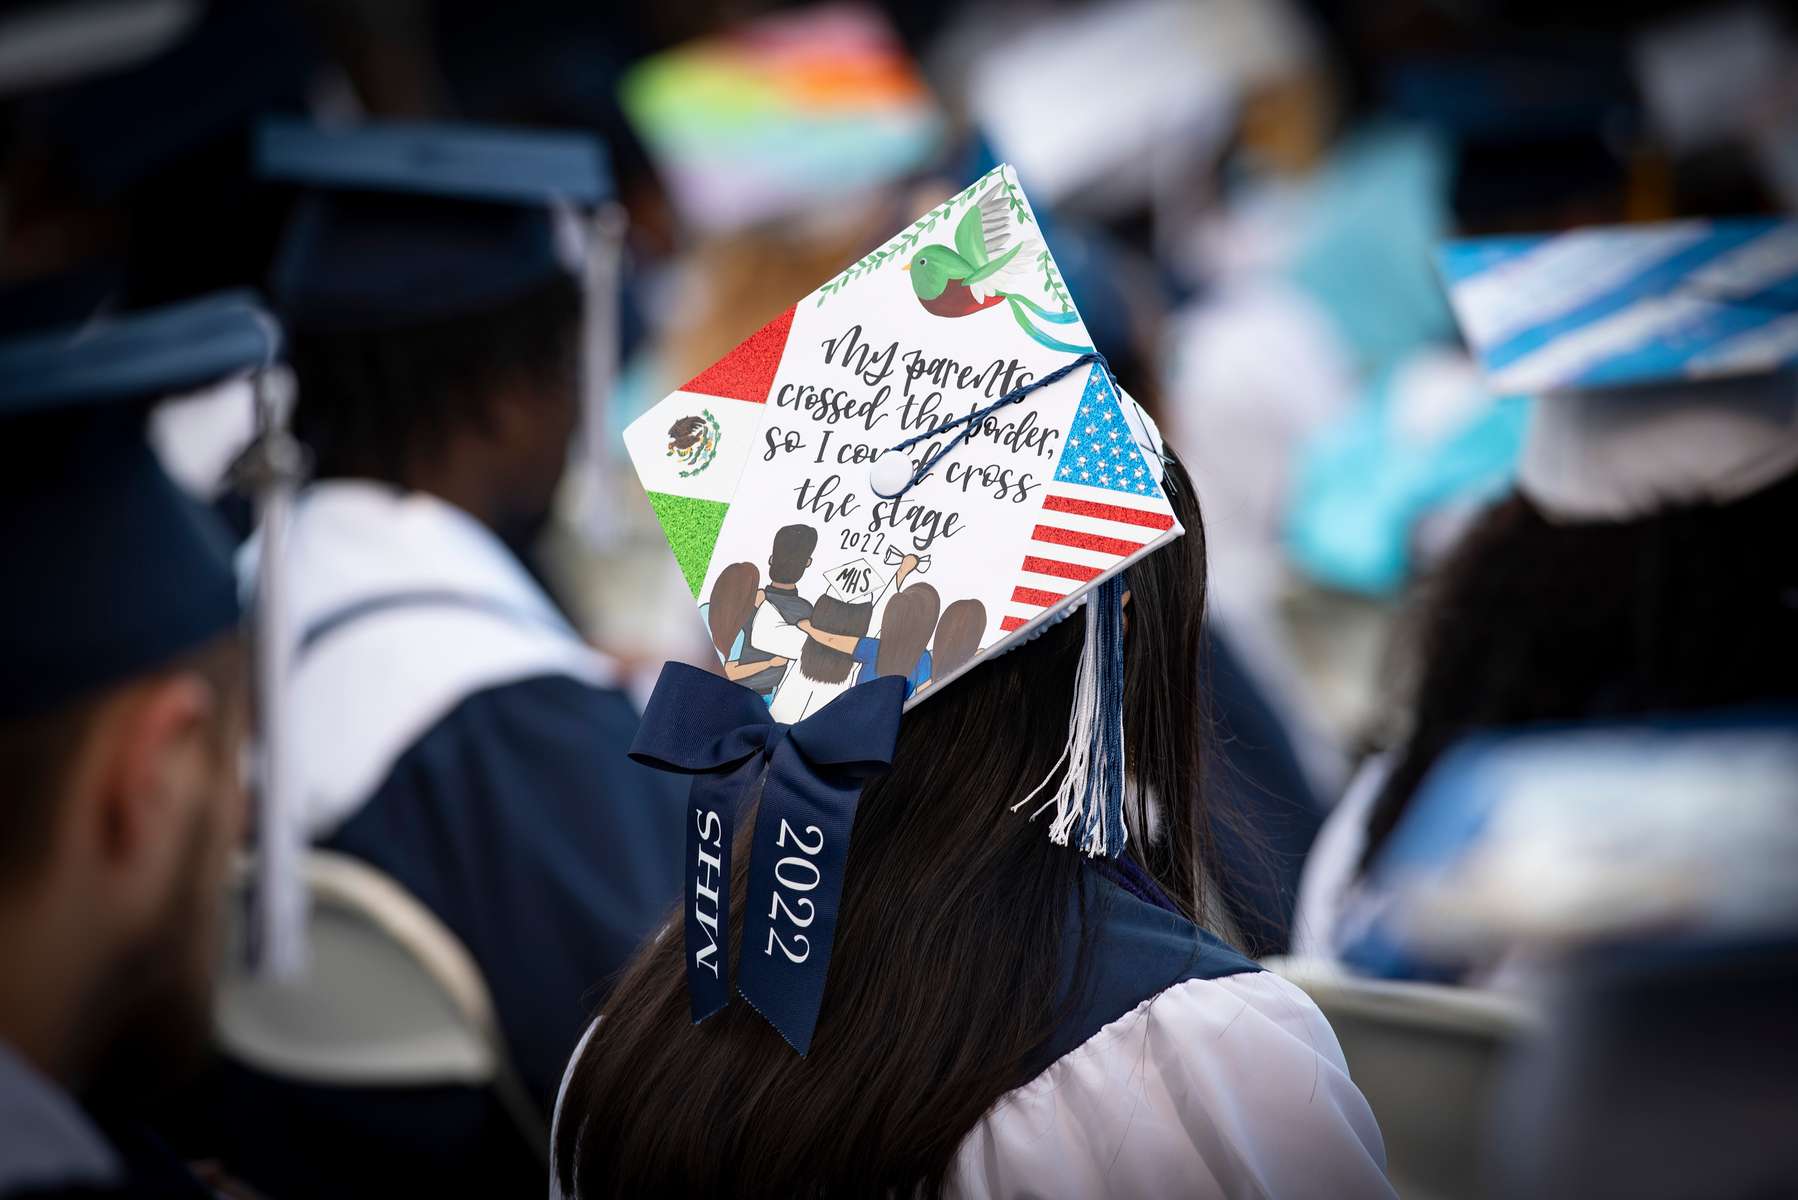 A Marietta High School graduate's cap tells the story of her family’’s journey, crossing the southern border years ago for a better life in the U.S.